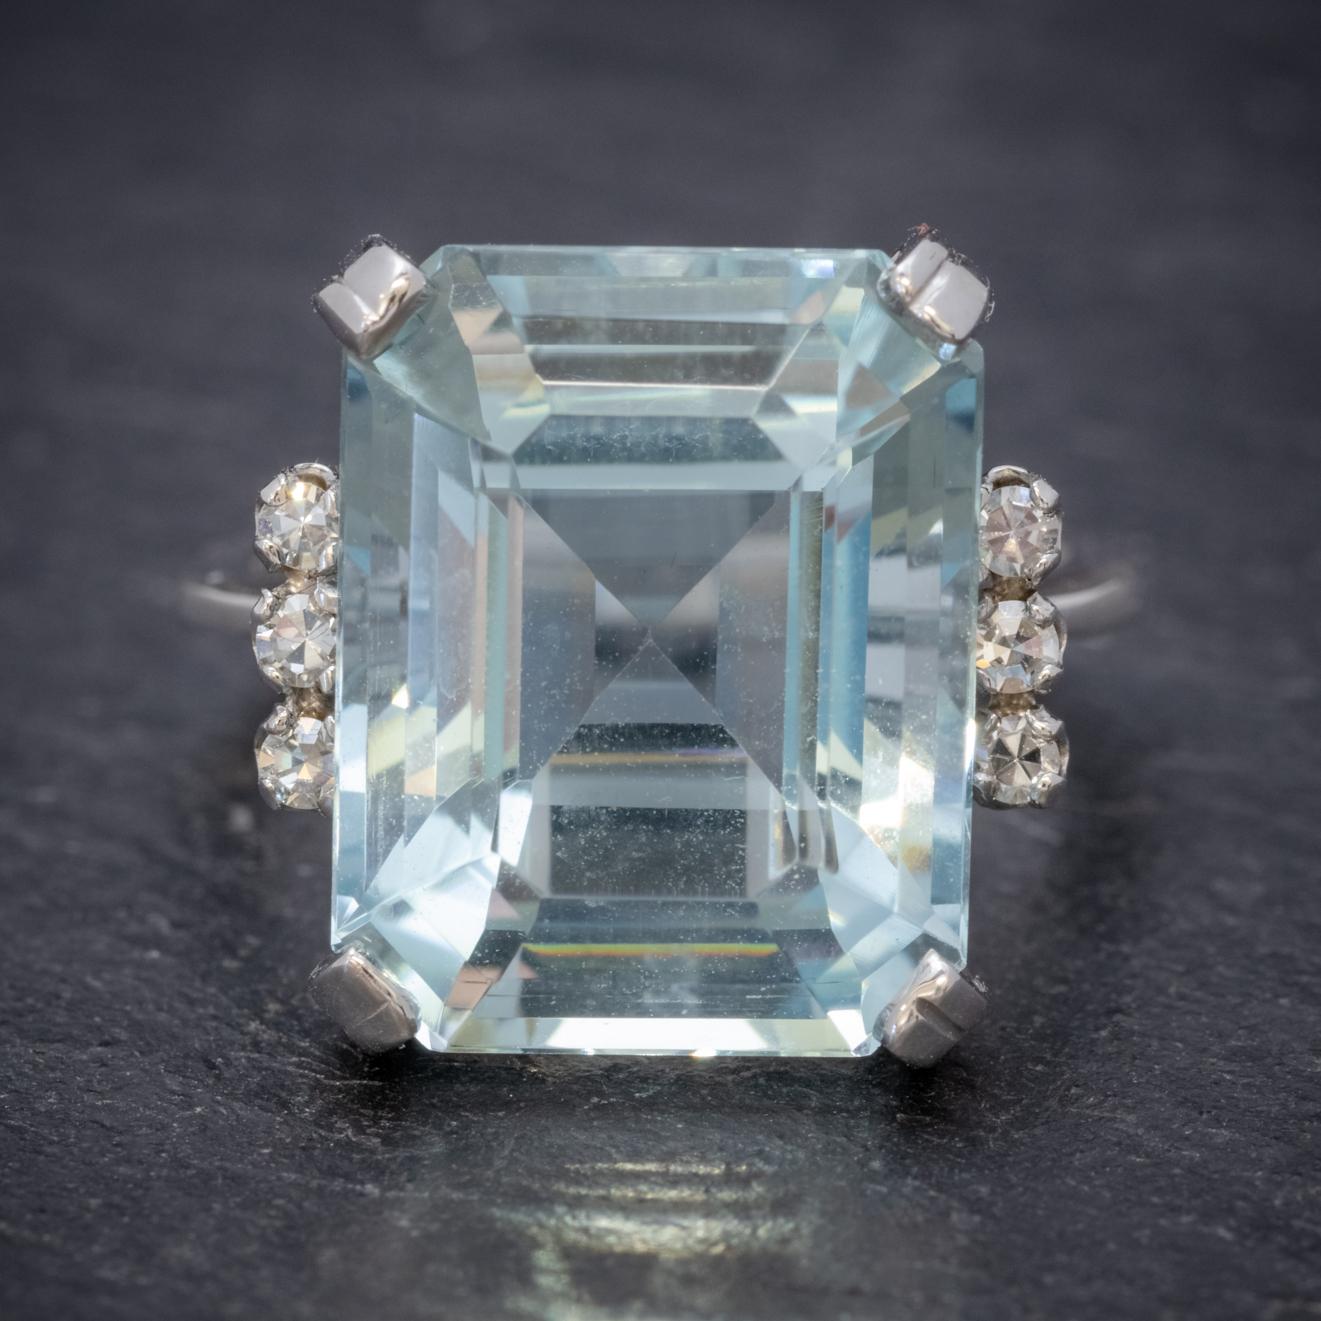 This magnificent Art Deco ring is claw set with a breath-taking emerald cut Aquamarine which is approx. 7ct flanked by three sparkling Diamonds on each shoulder which total to 0.12ct. 

The stones are showcased in an extravagant 18ct White Gold